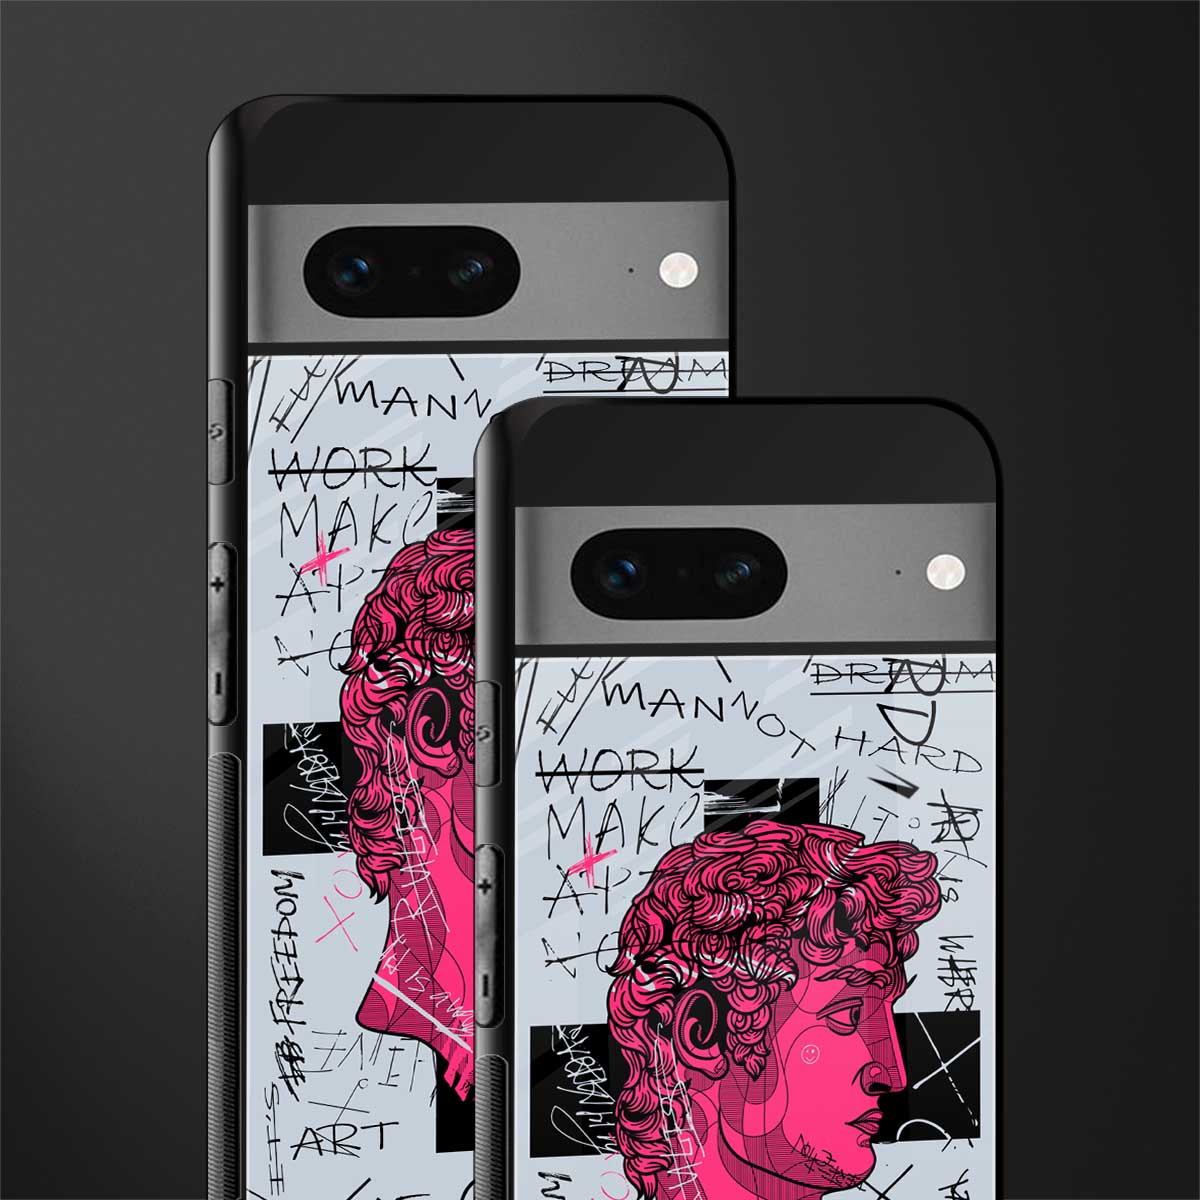 lost in reality david back phone cover | glass case for google pixel 7